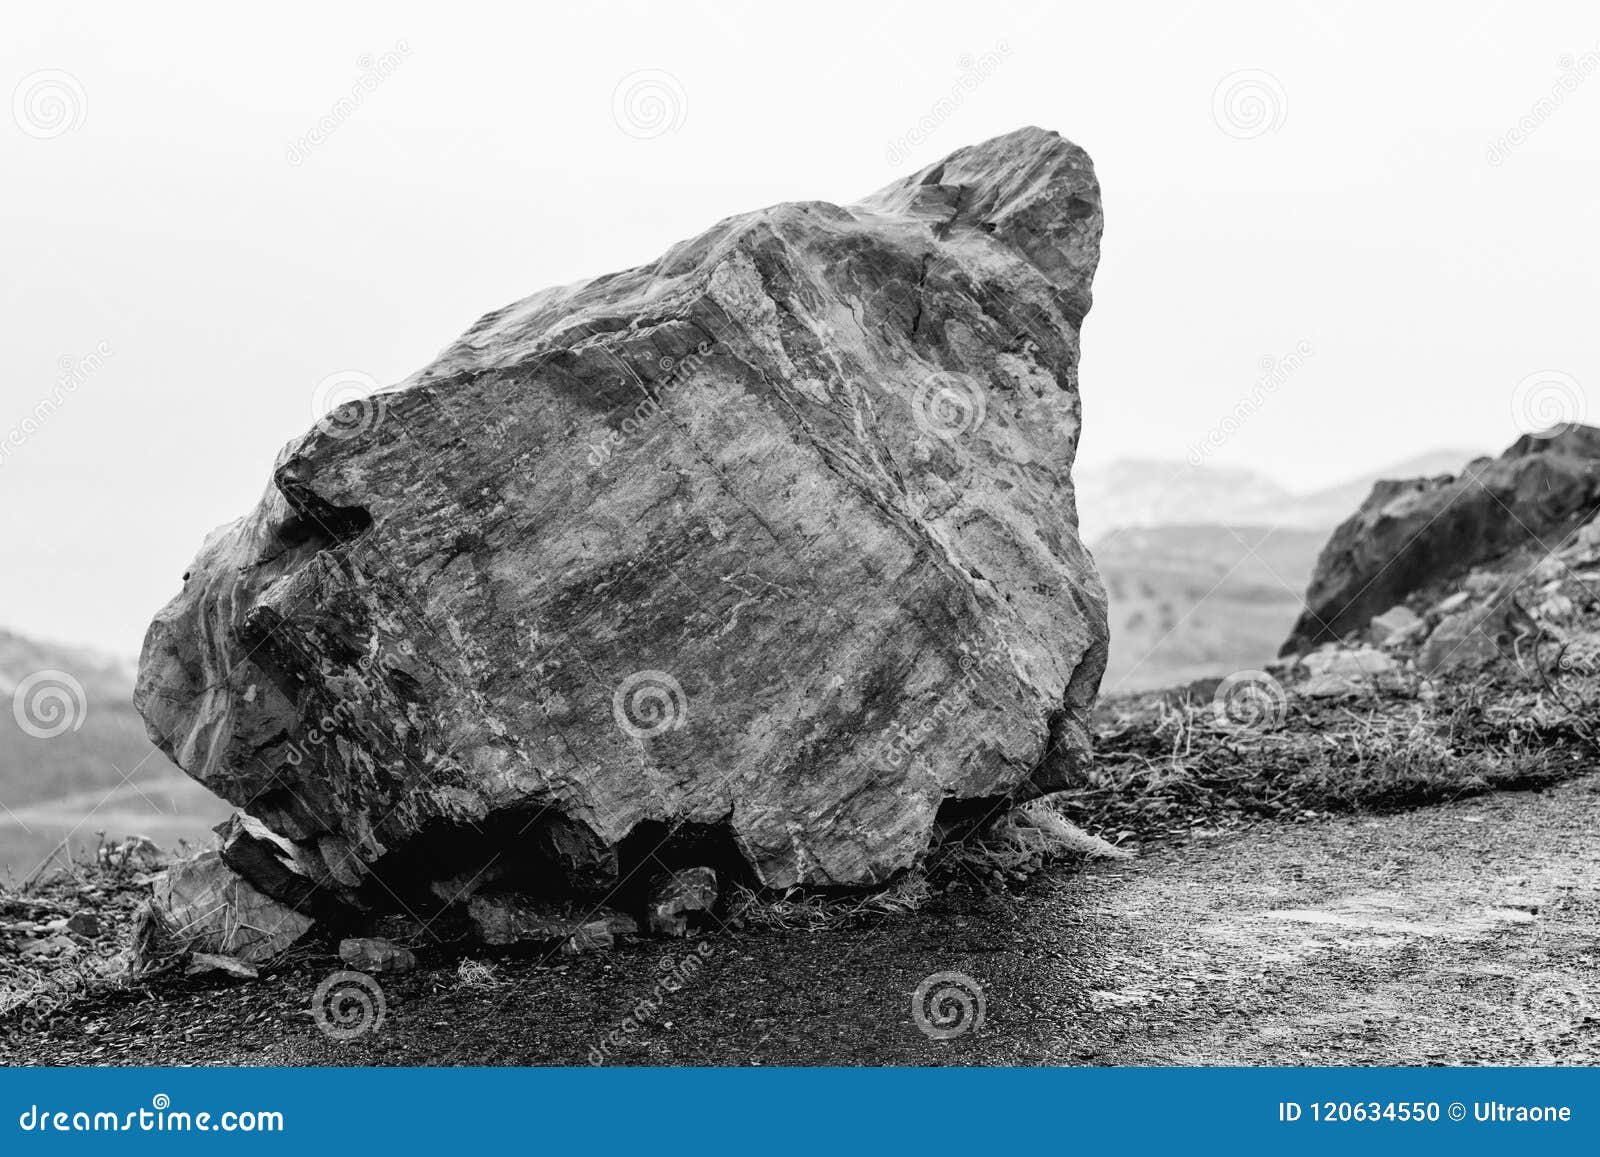 Splinter Rocks at the Edge of a Mountain Road Stock Photo - Image of ...